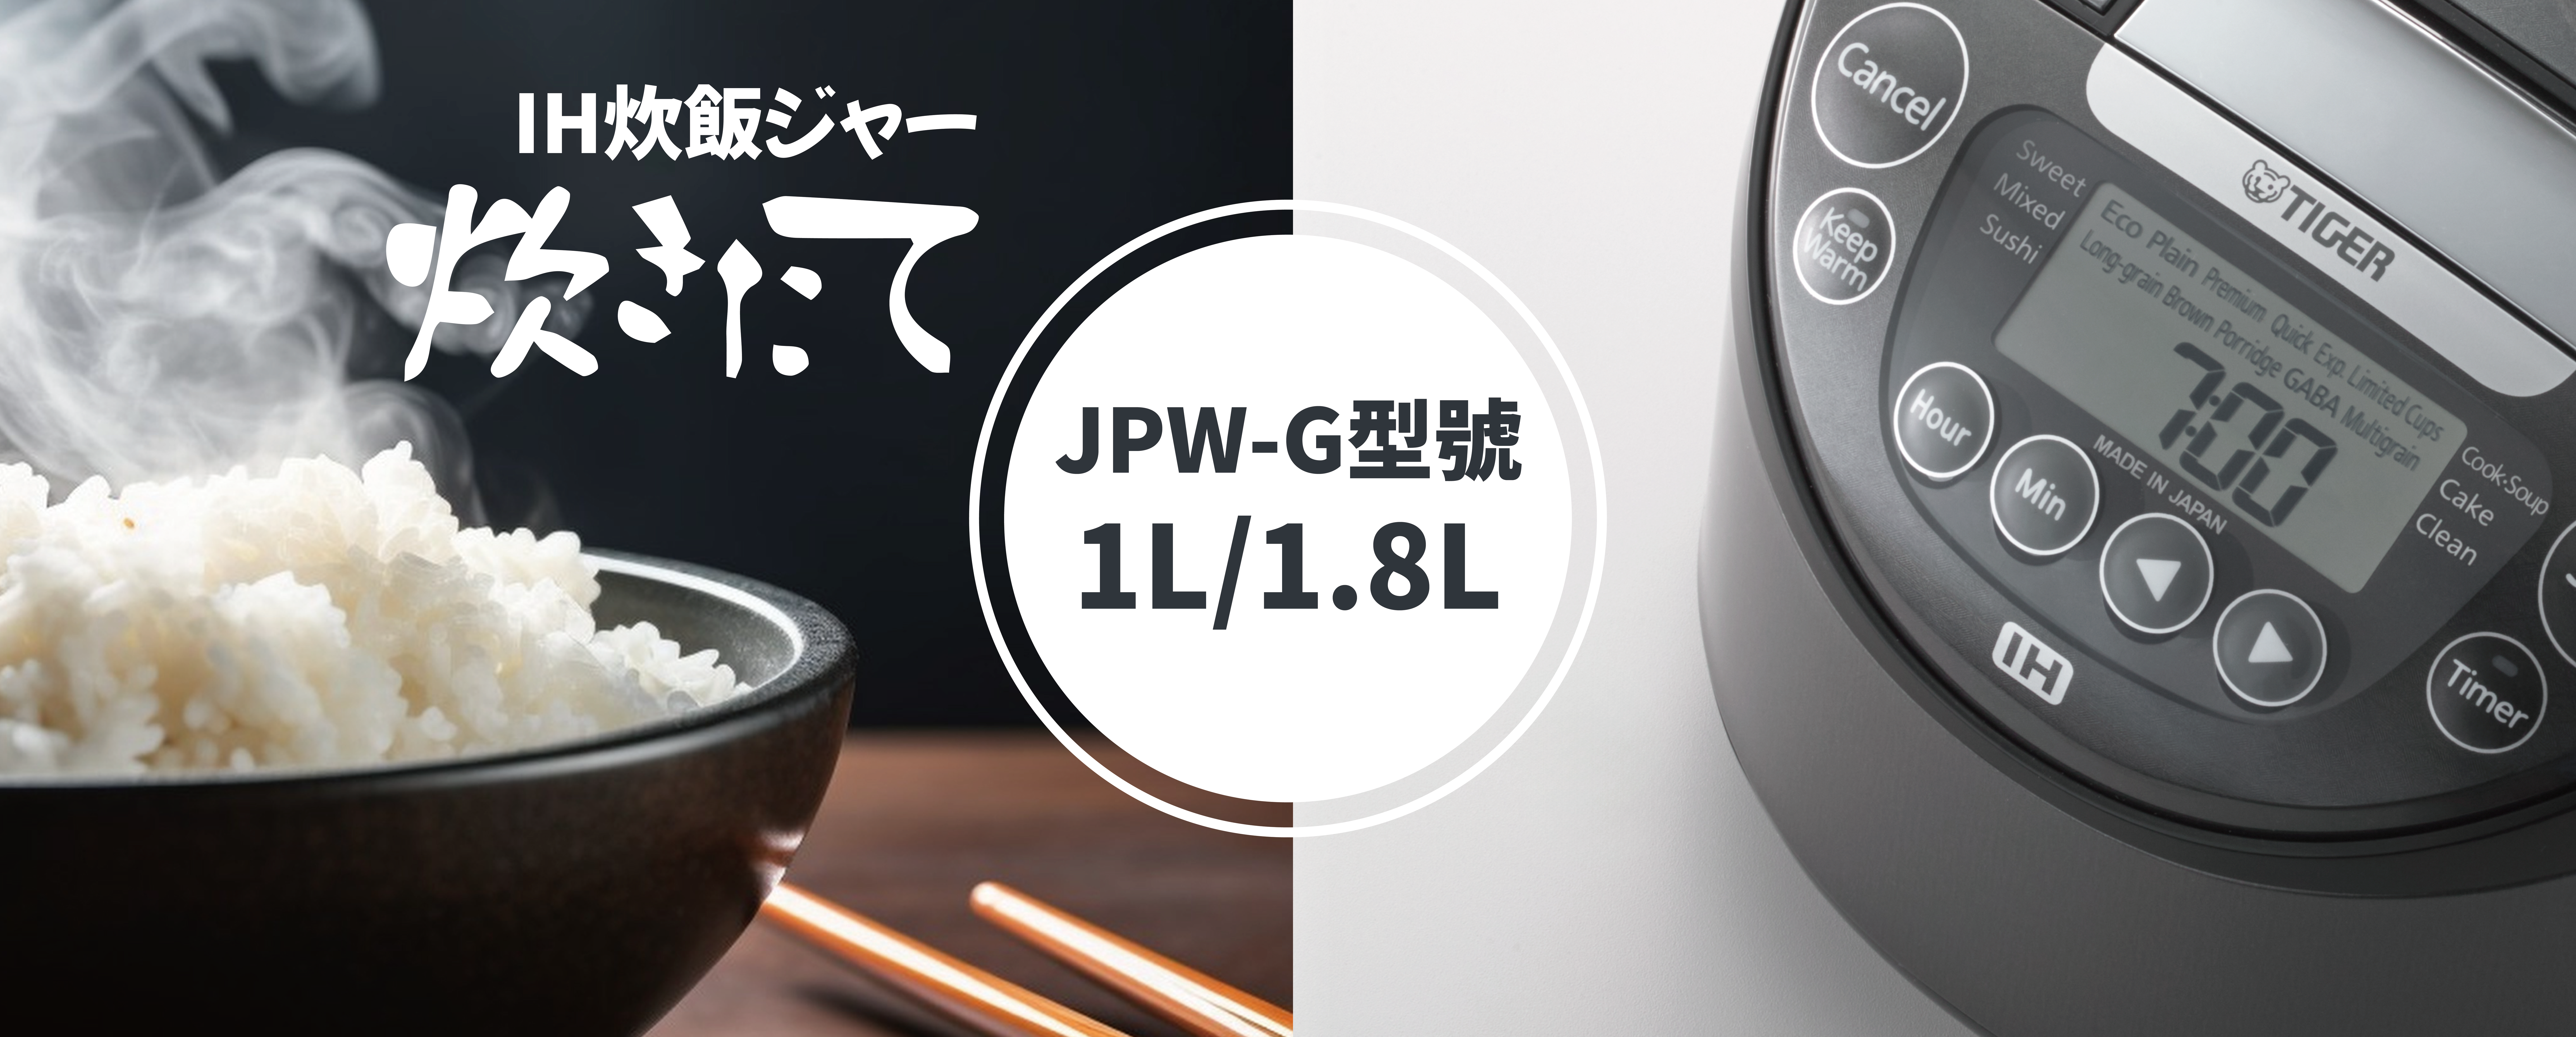 JPW-G e-shop Banner.png (8.82 MB)